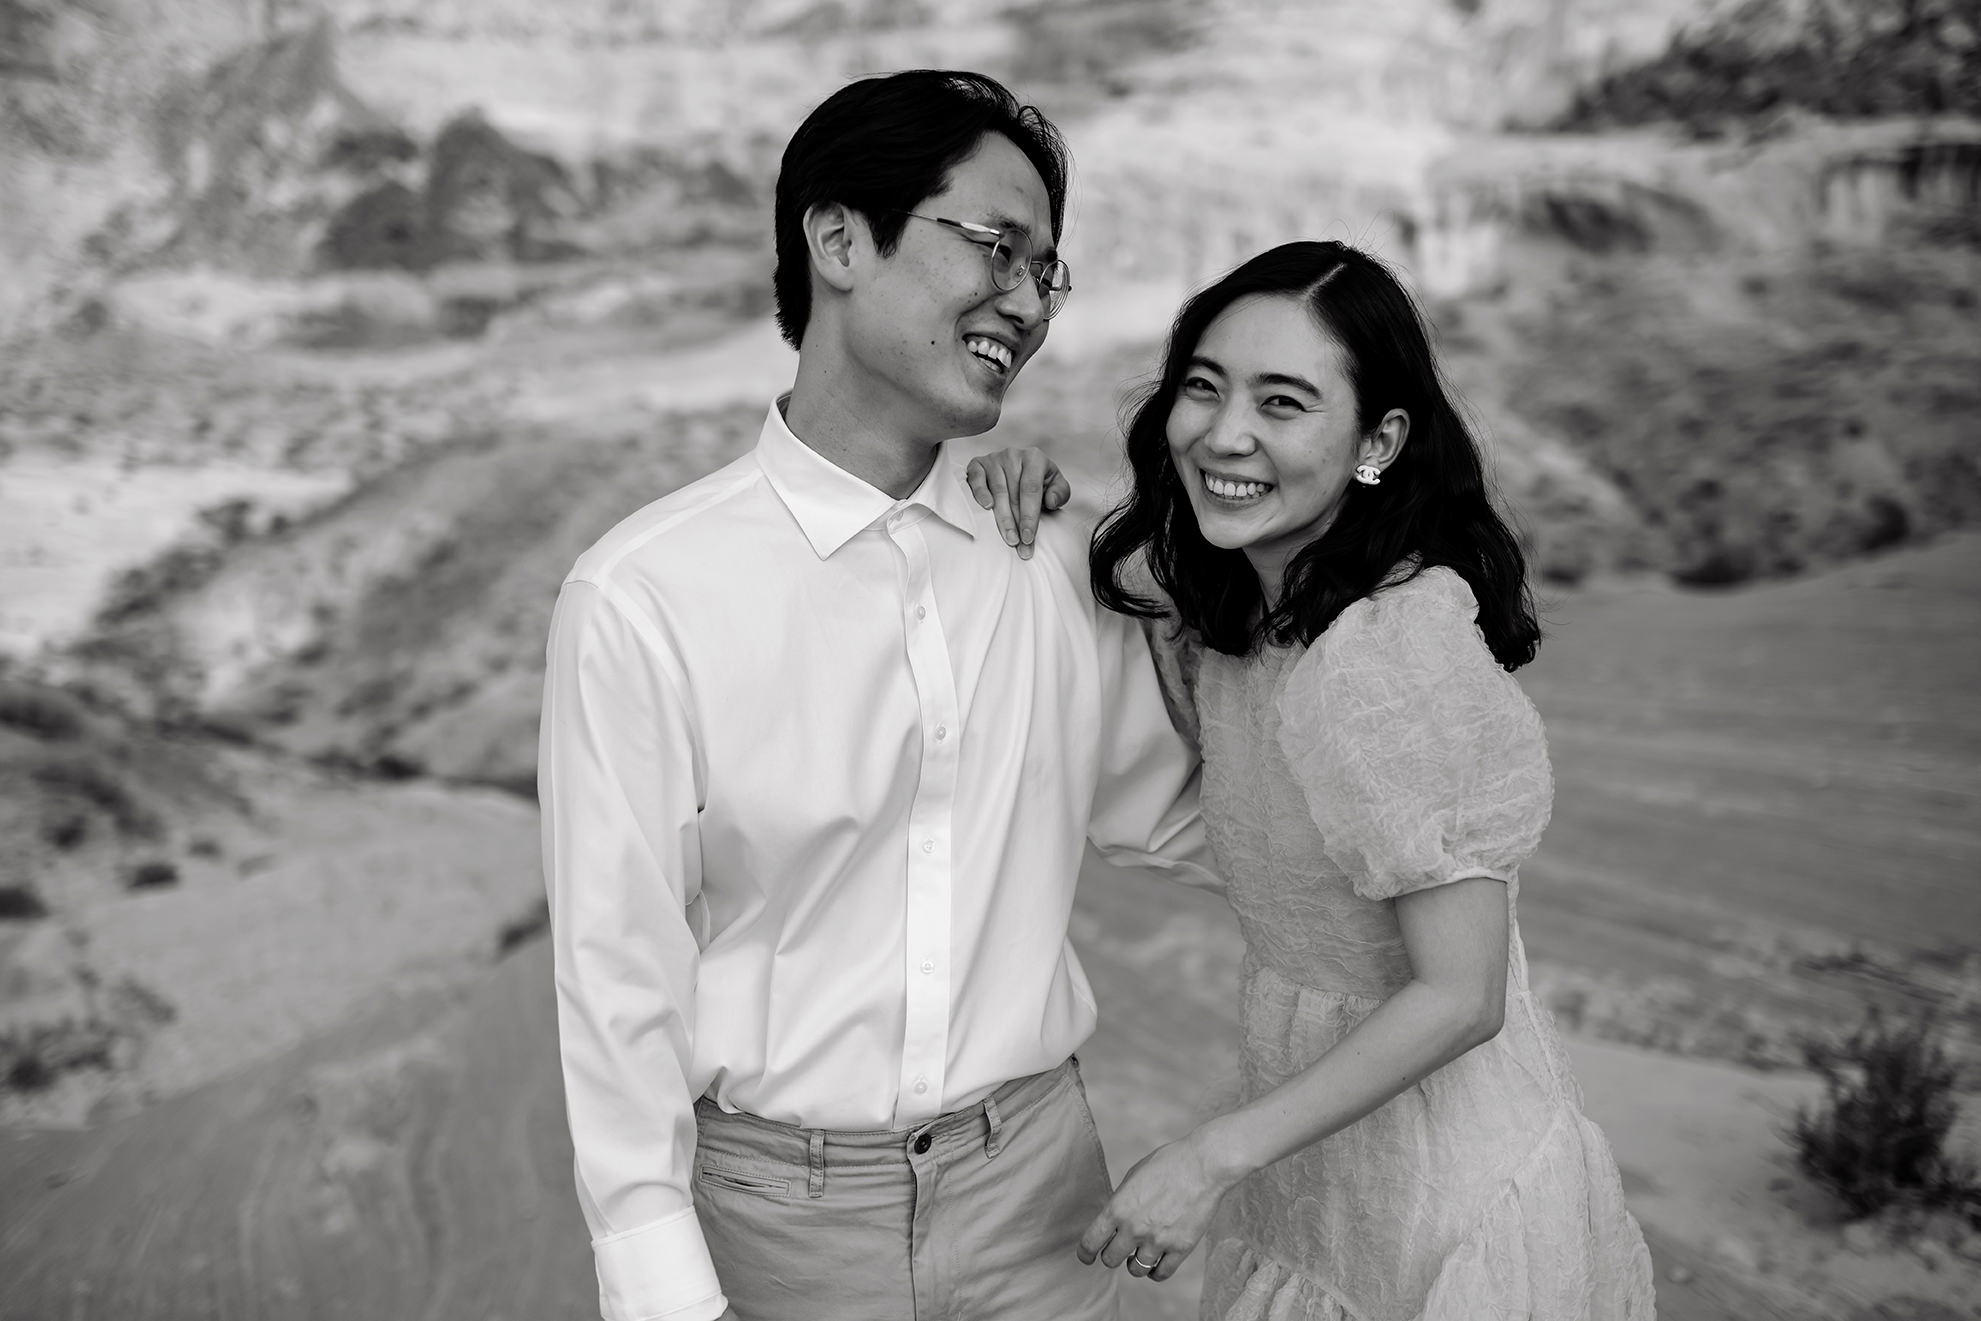 Husband and wife laugh with each other in black and white.